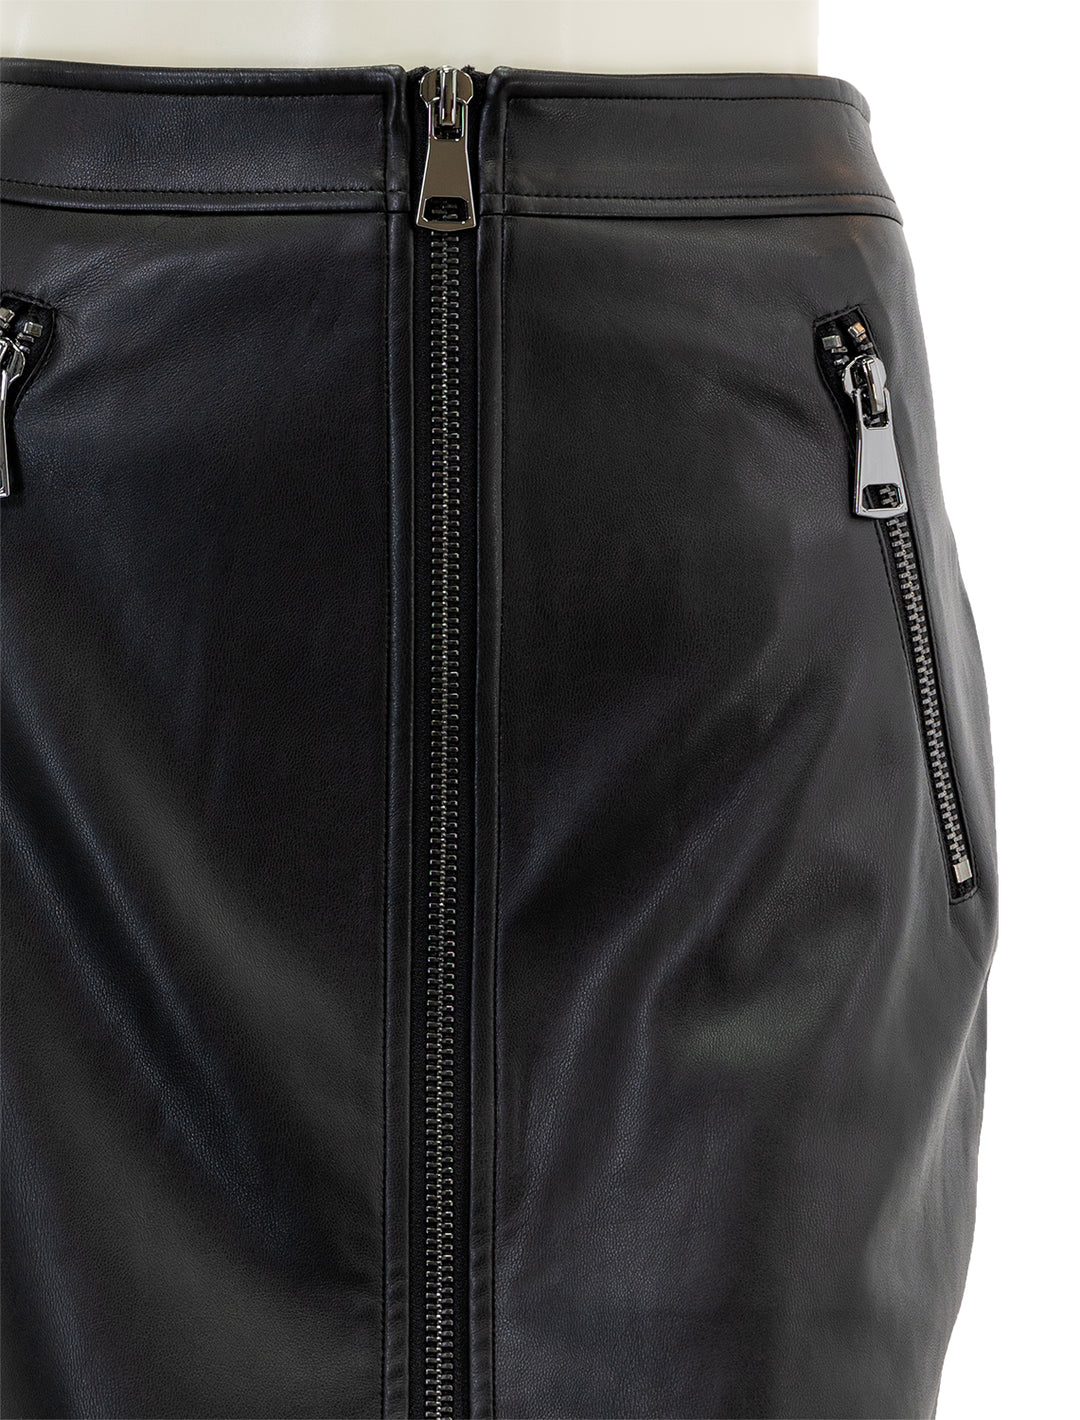 Close-up view of Essentiel Antwerp's encourage faux leather skirt in black.